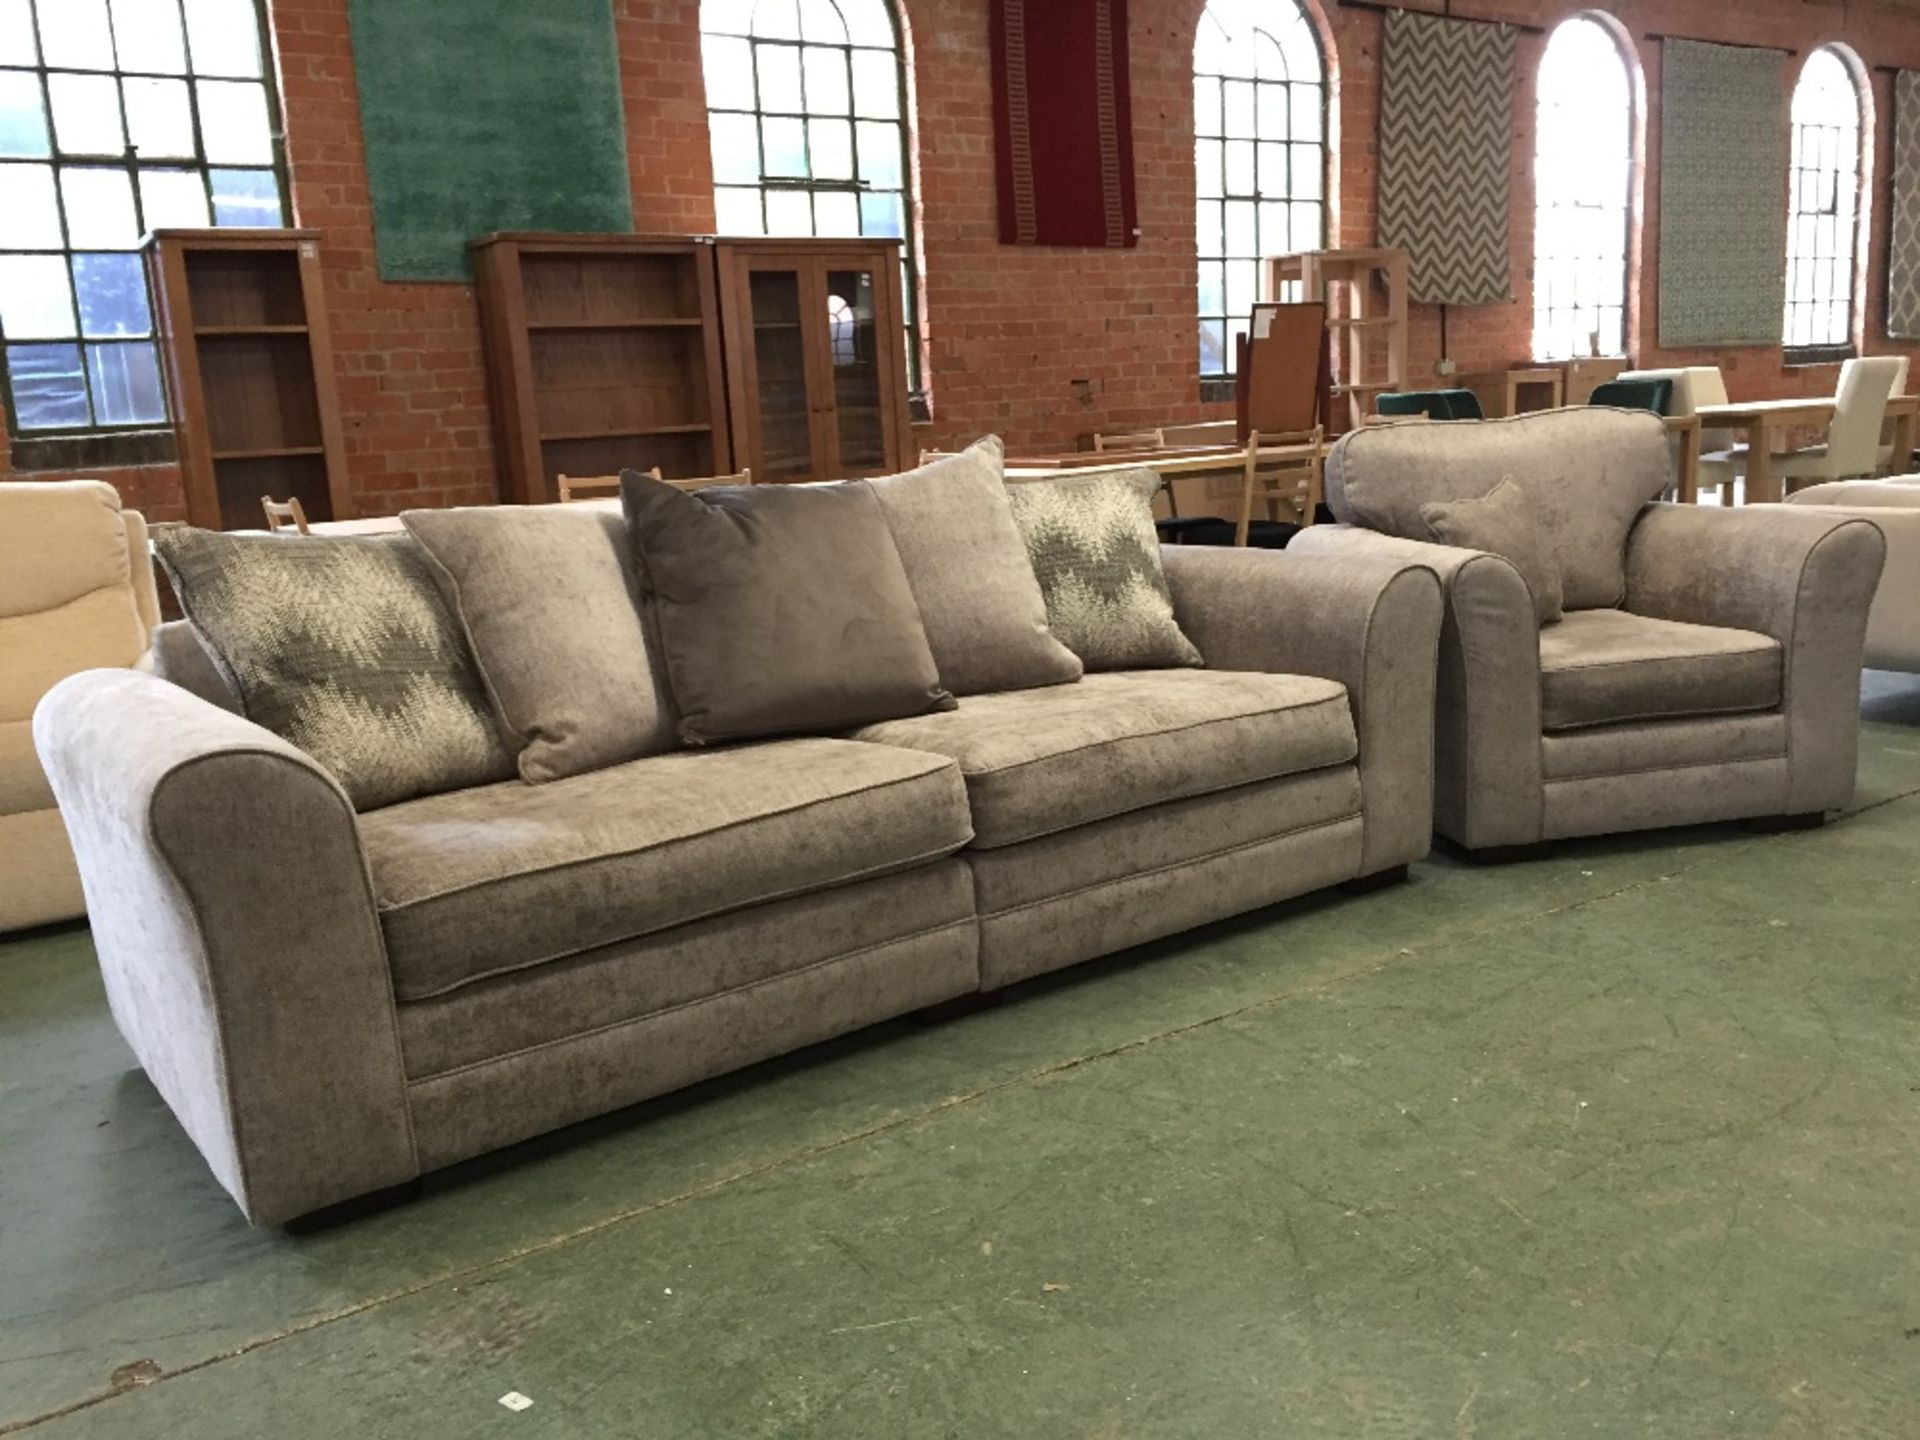 GREY LARGE 3 SEATER SOFA AND CHAIR (WM14-7)